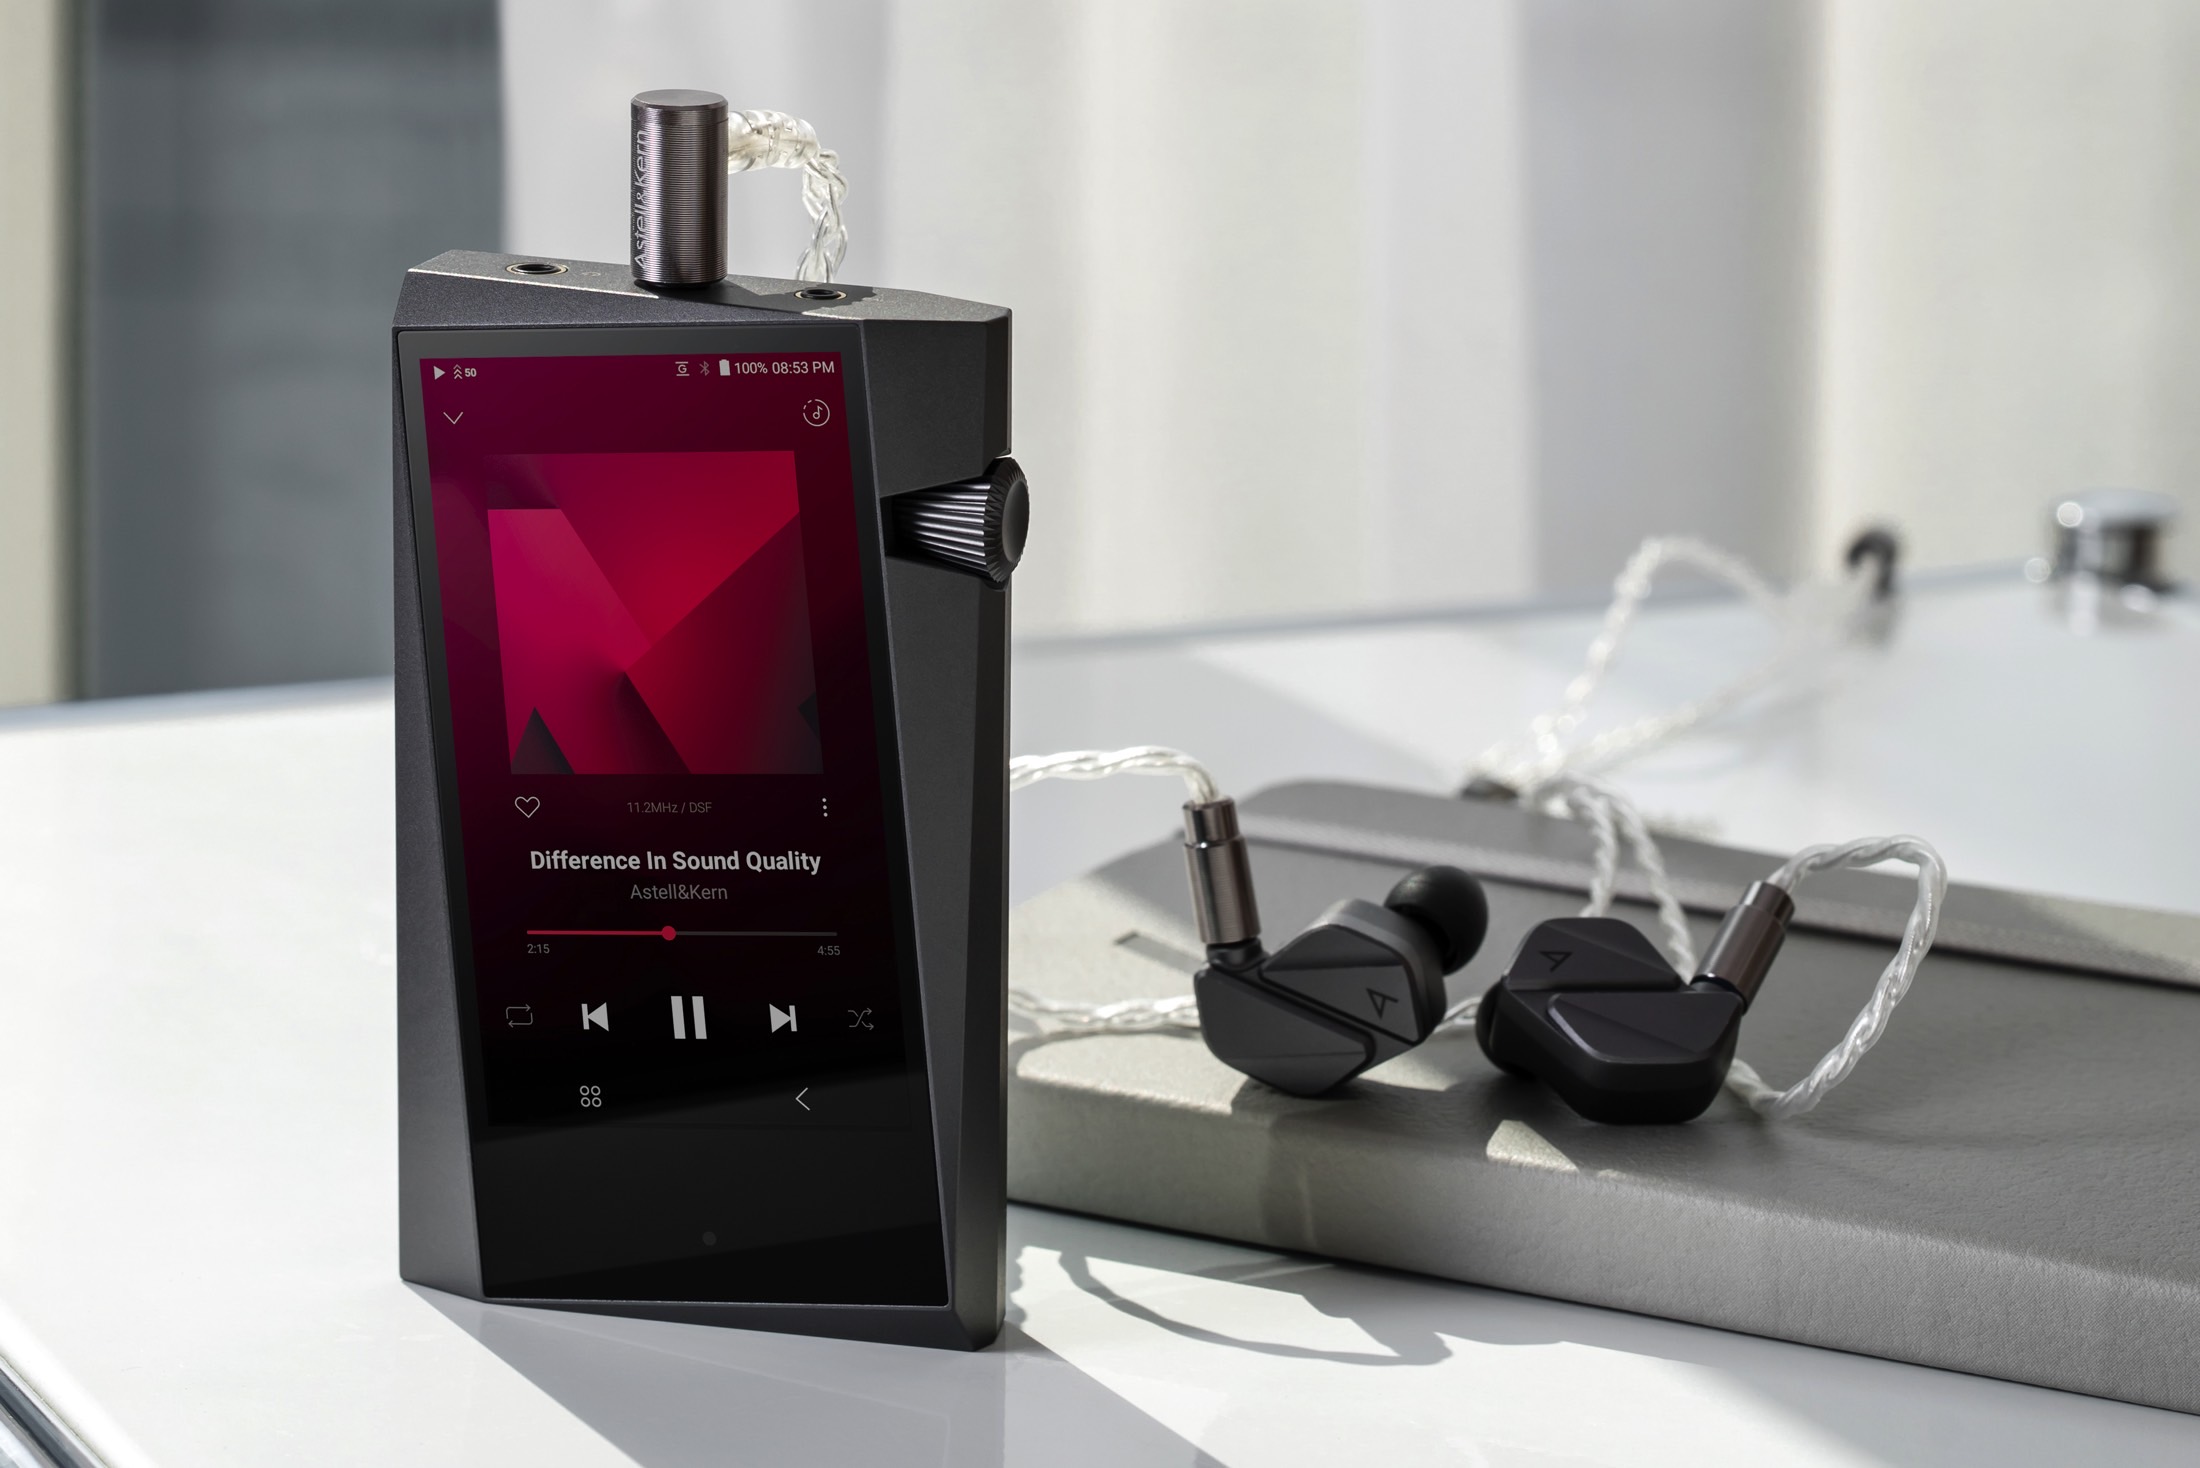 Astell&Kern SR35 digital audio player with earbuds.